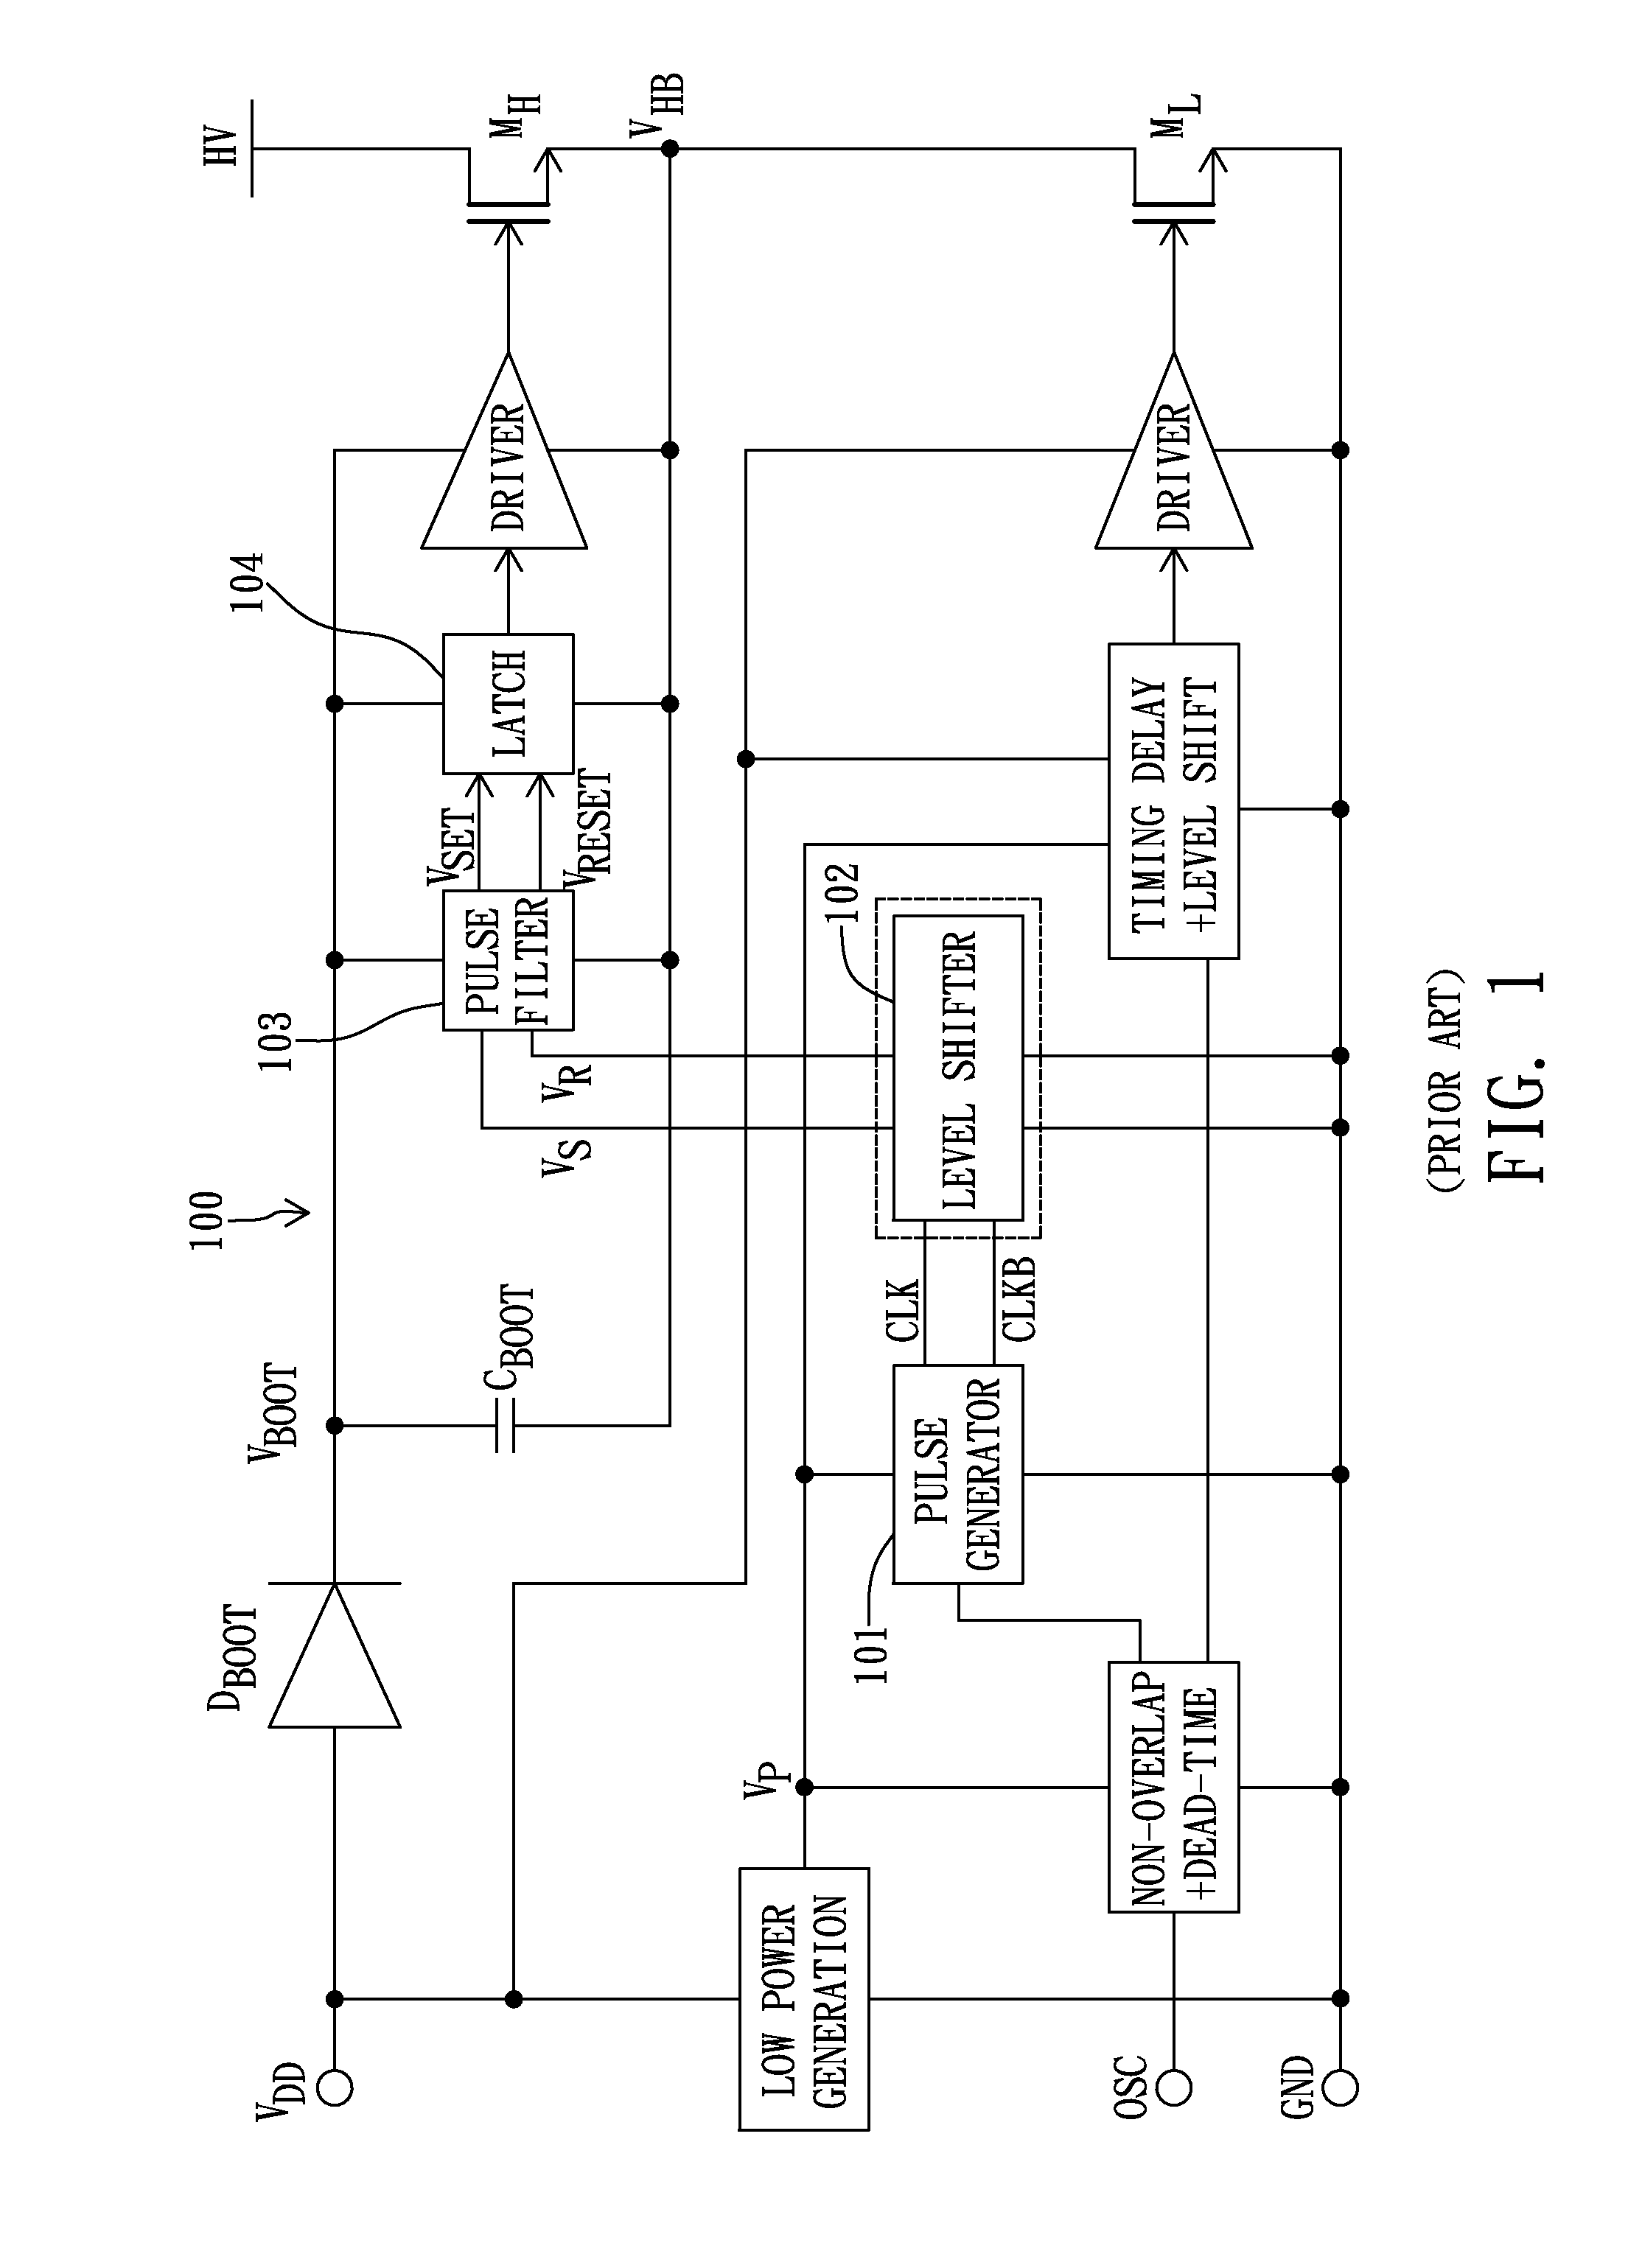 Pulse filter and bridge driver using the same